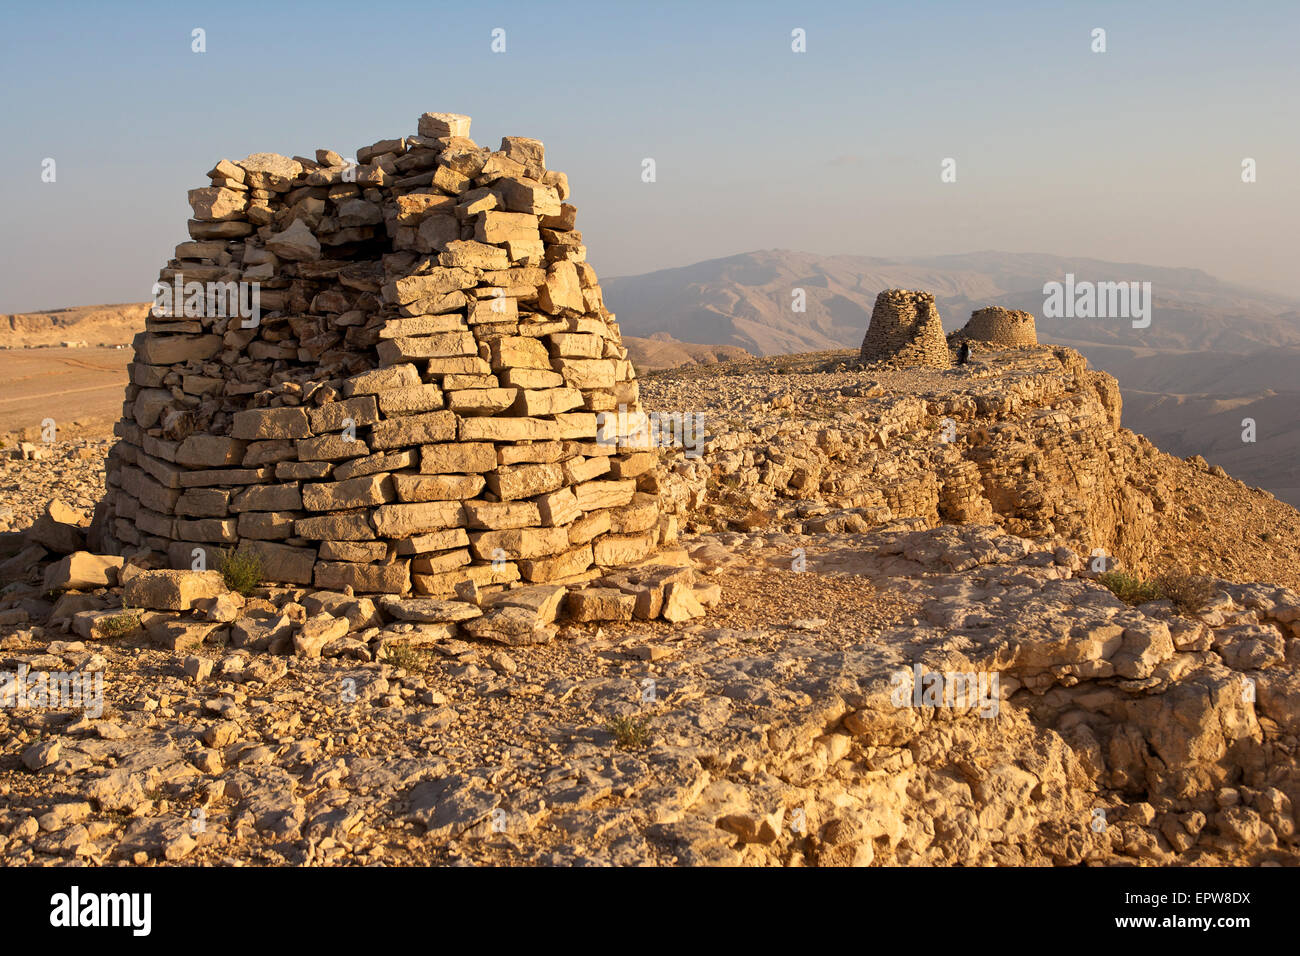 Lined up dramatically atop a rocky ridge, the Beehive Tombs of Bat, in Oman, are a Unesco World Heritage Site. Stock Photo